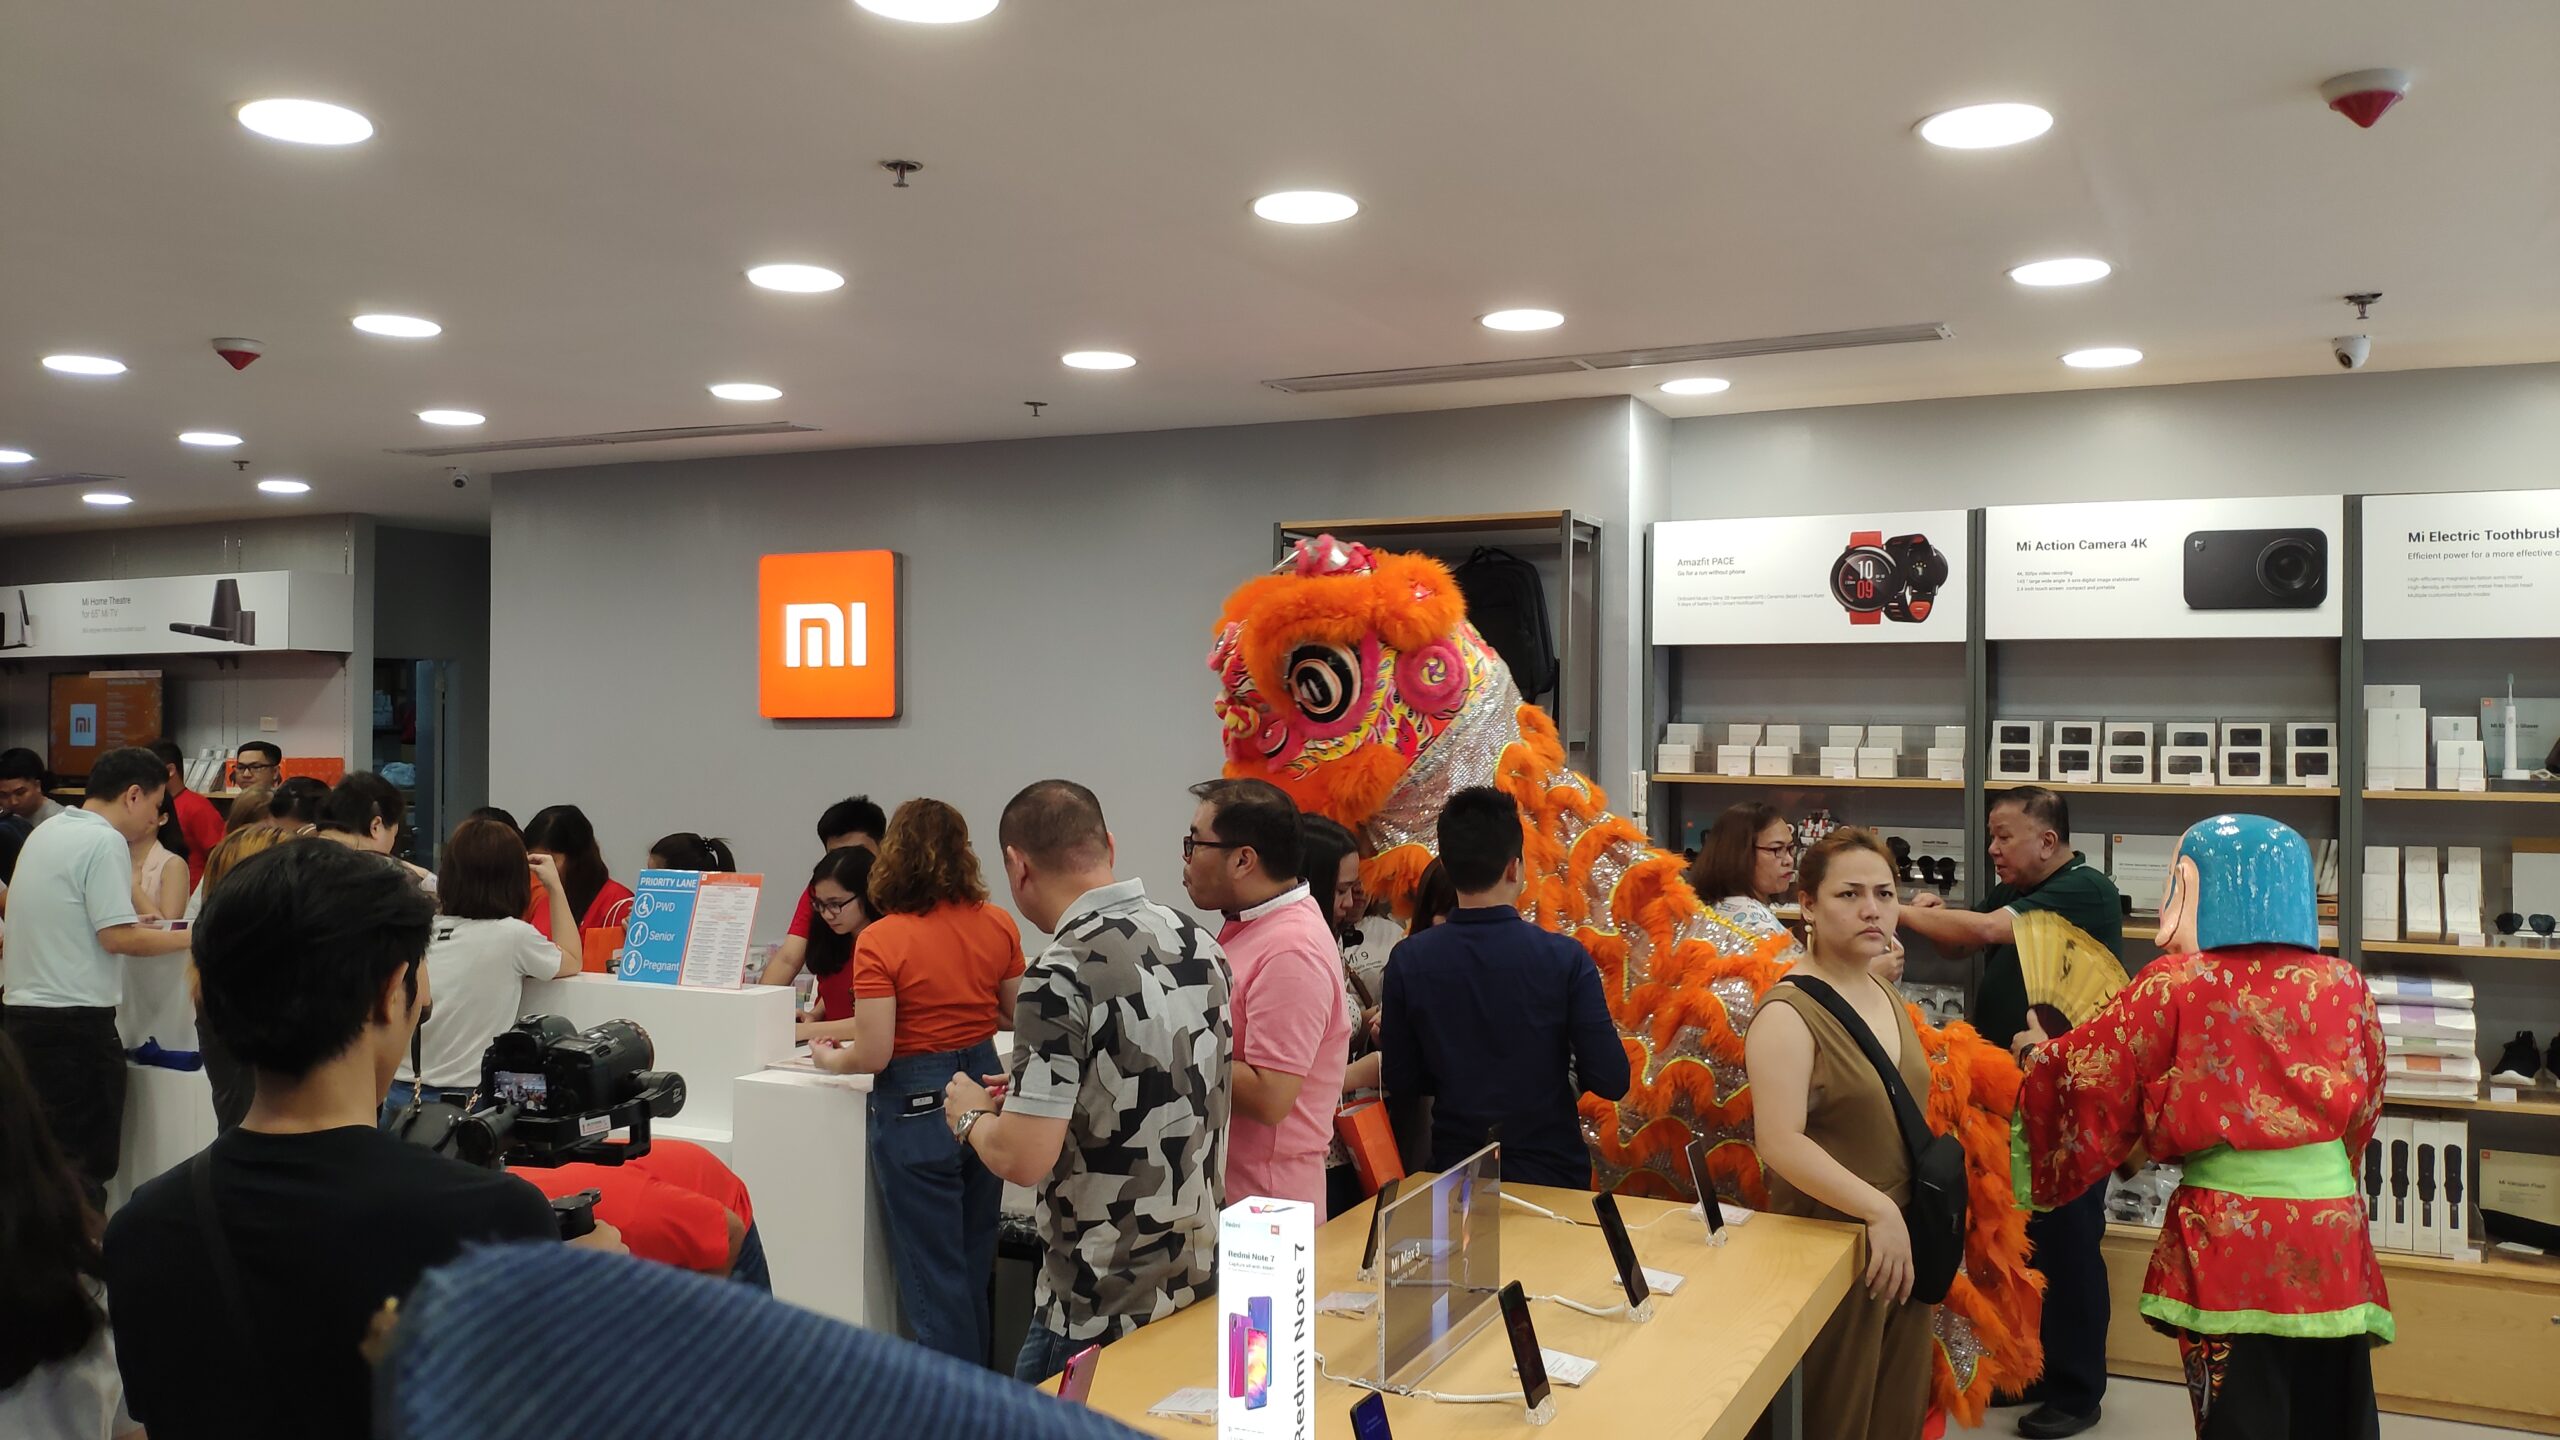 8th Store of Mi Philippines Opened Today March 30th at Lucky Chinatown Mall!